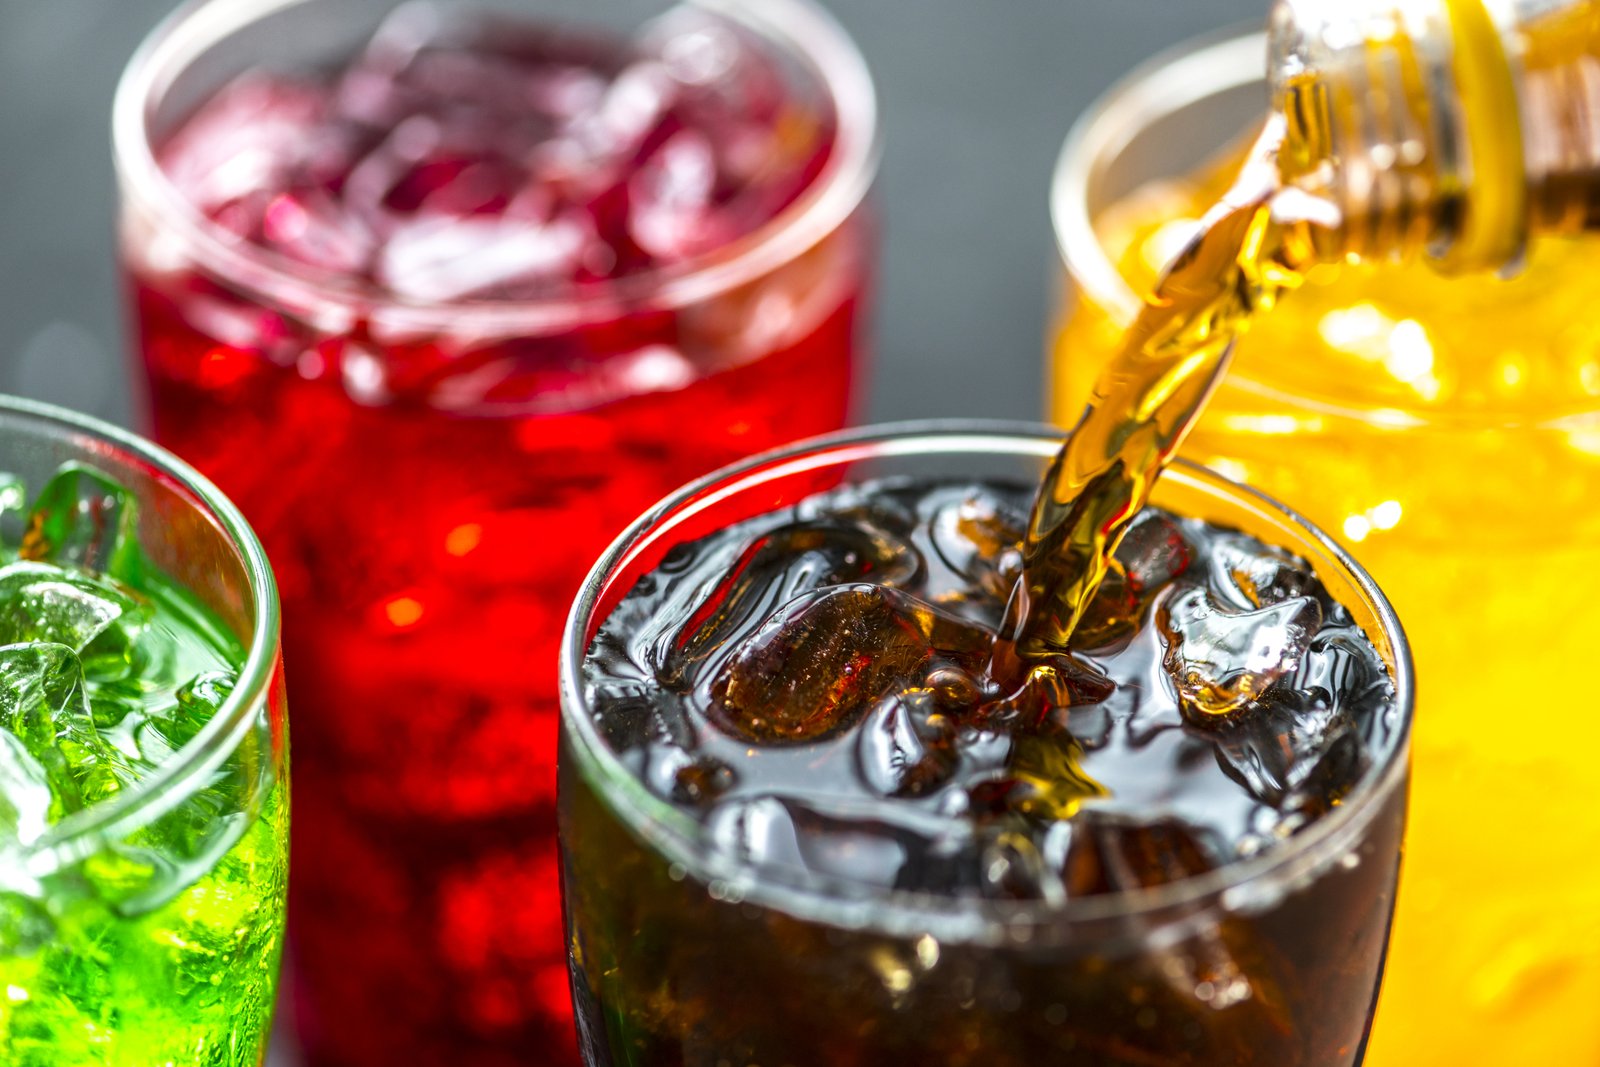 Artificially Sweetened Drinks Increase Risk Of Irregular Heartbeat: Study